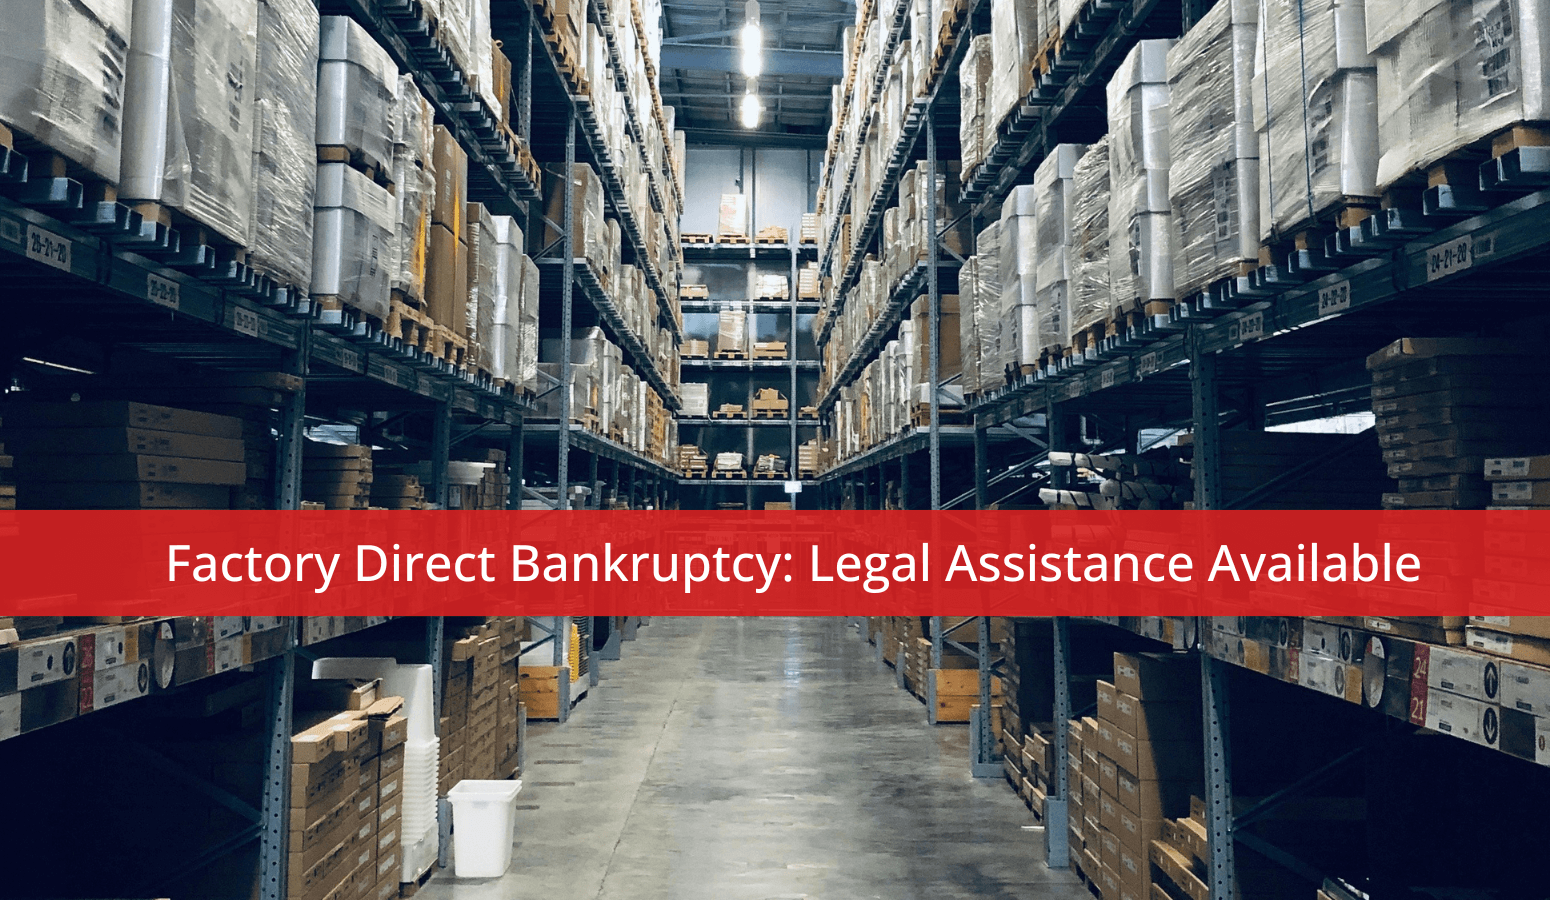 Featured image for “Factory Direct Bankruptcy: Legal Assistance Available”